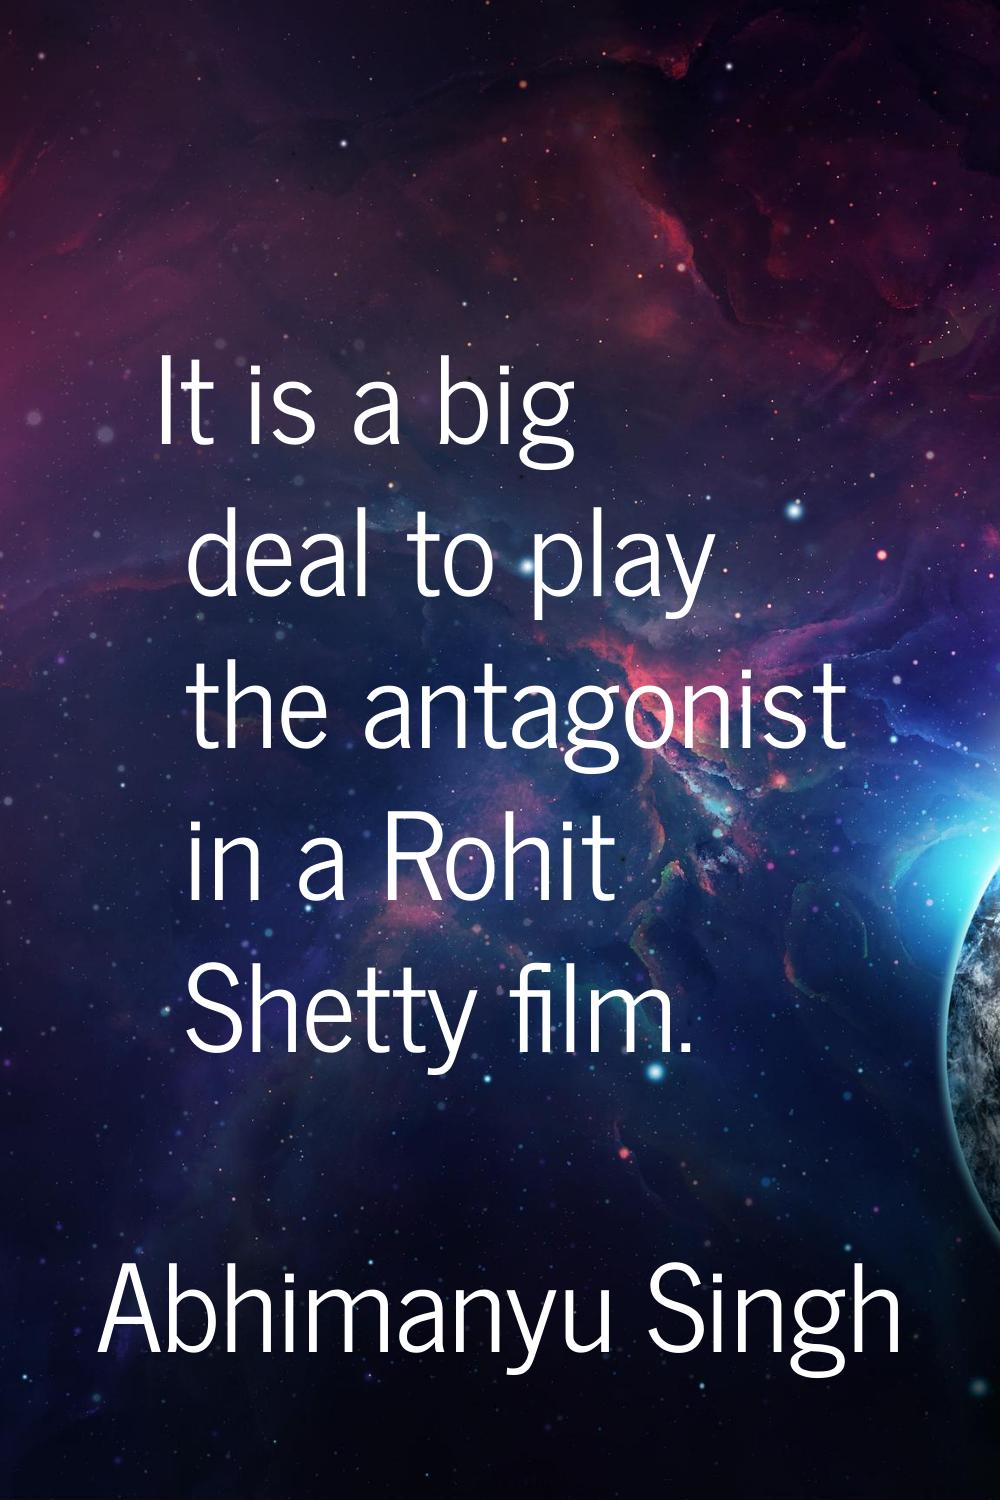 It is a big deal to play the antagonist in a Rohit Shetty film.